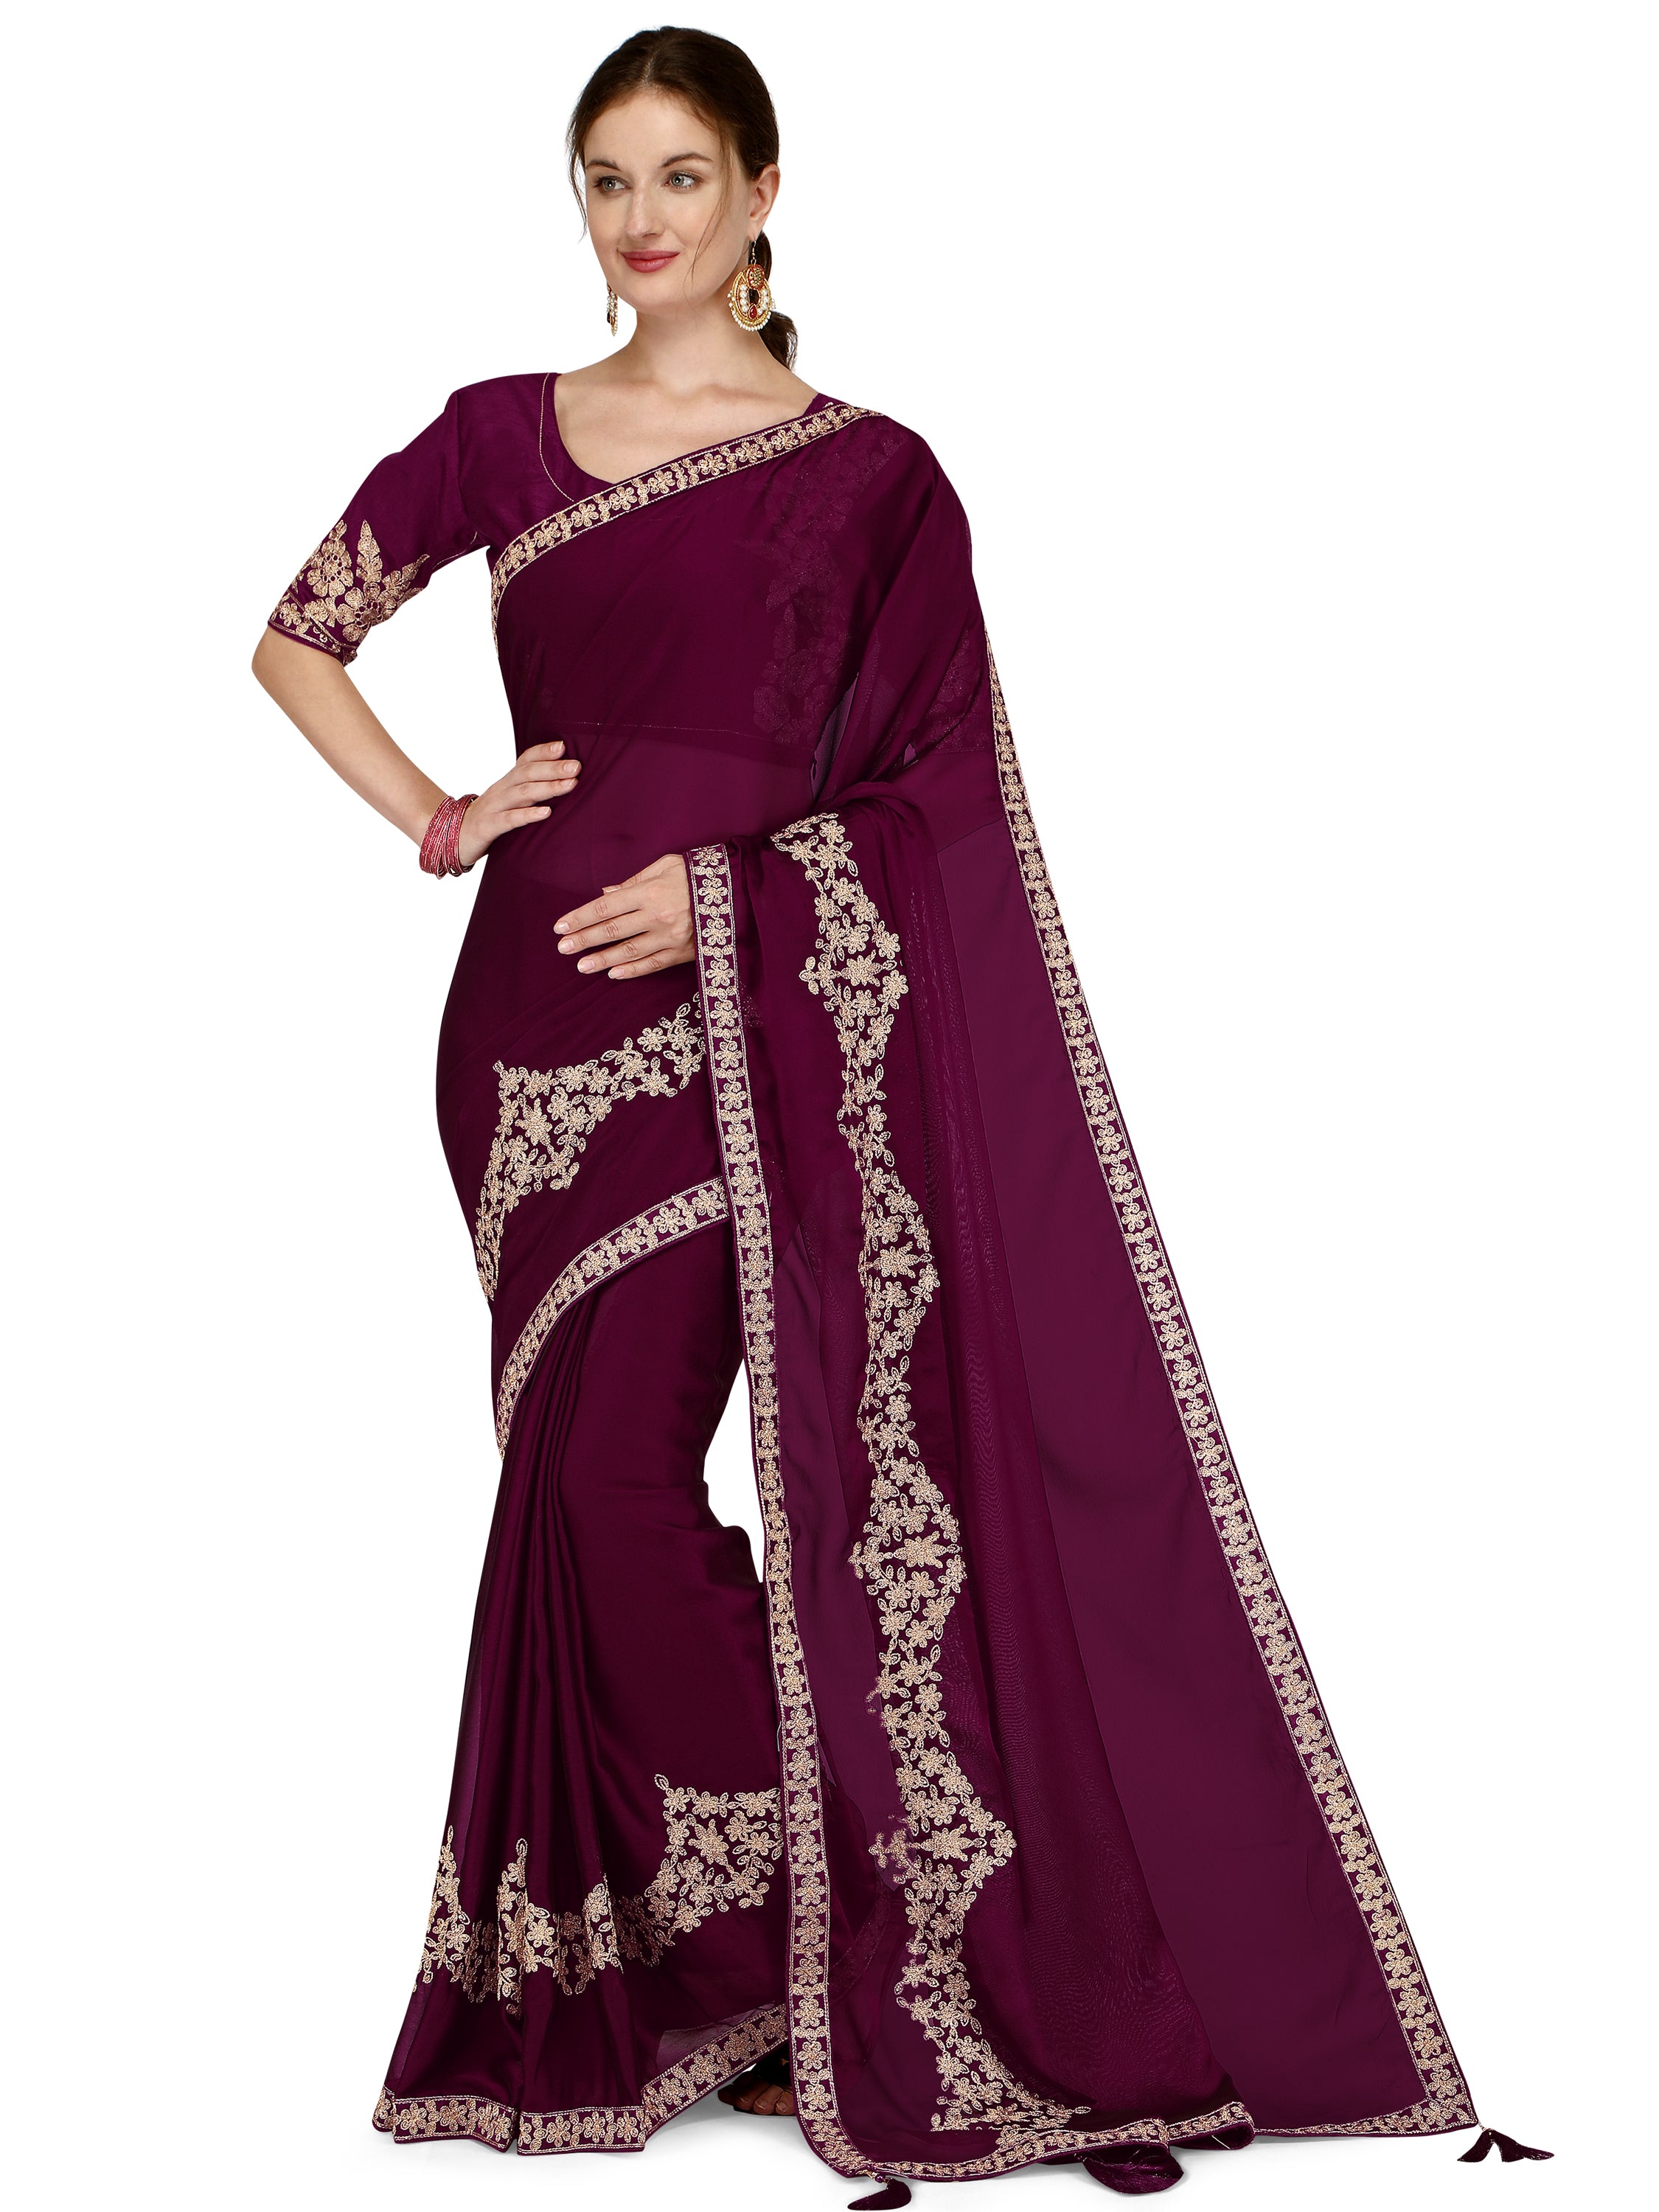 Women's Ahir Embroidery Work Border Silk Saree With Blouse Piece (Purple) - NIMIDHYA